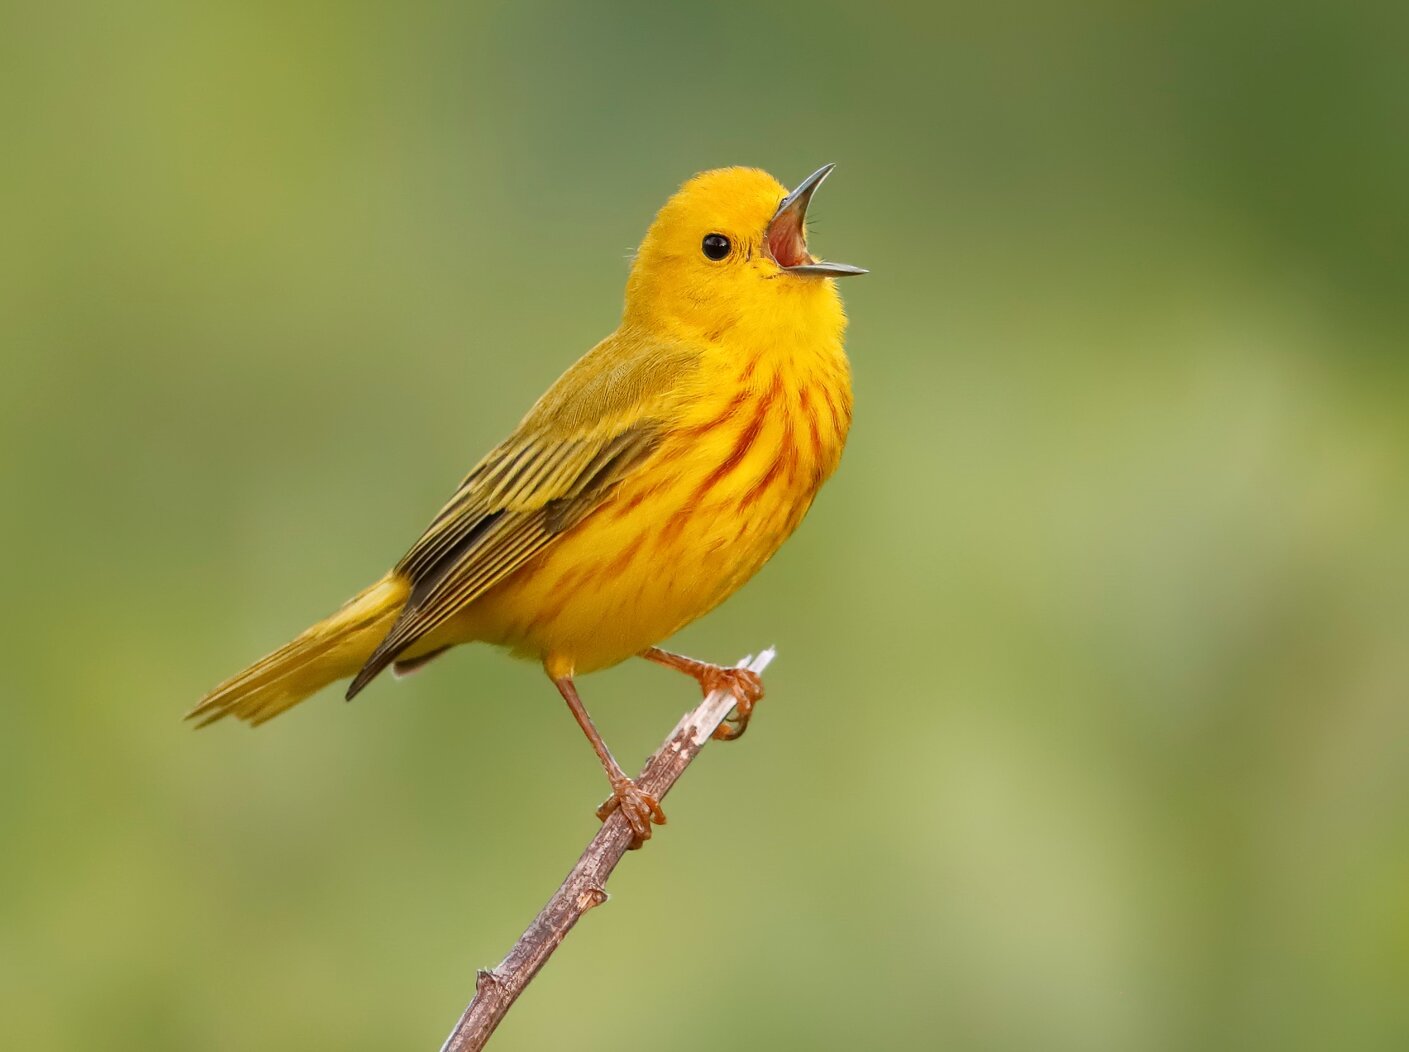 The "sweet-sweet-I`m-so-sweet" song of the Yellow Warbler can be heard in Heritage Park. Photo: <a href="https://www.flickr.com/photos/120553232@N02/" target="_blank" >Isaac Grant</a>